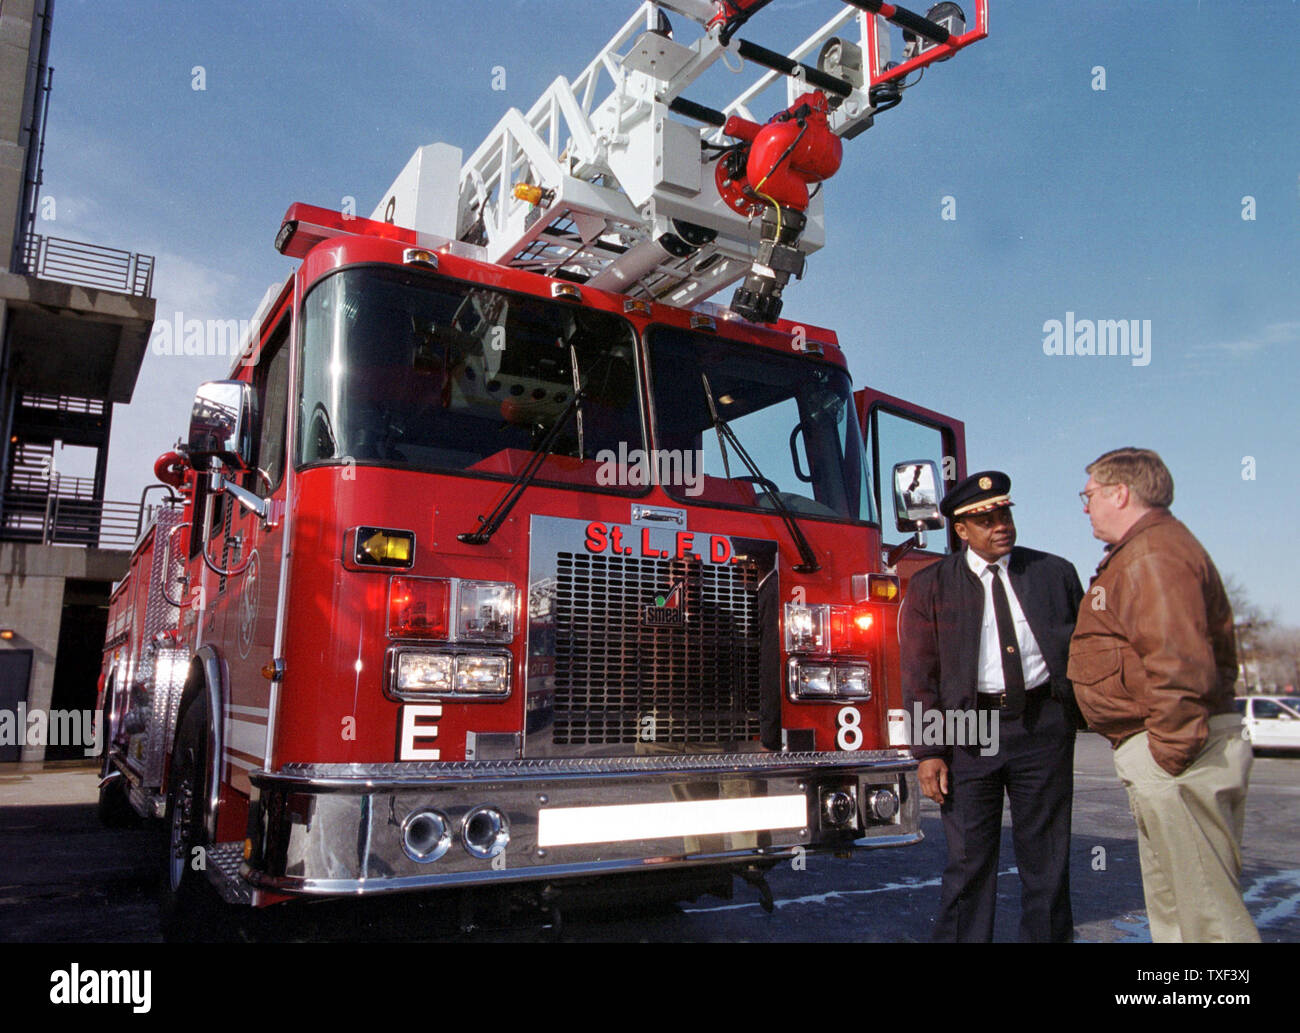 SLP2000020308 - 02 FBRUARY 2000 - ST. LOUIS, MISSOURI, USA:  St. Louis Fire Chief Sherman George, left, talks with fleet maintaince manager Dave Ryder during the delivery of the first of 30 new fire trucks, February 3. The pumper, manufactured by Smeal Fire Apparatus in Nebraska, is priced at $412 thousand and offers seating for seven, a 75-foot aerial ladder and twice the pumping capability of the 1987 Pierce or LTI models now in service. All of the new trucks will be in service in the next 18 months.  rg/bg/Bill Greenblatt    UPI Stock Photo